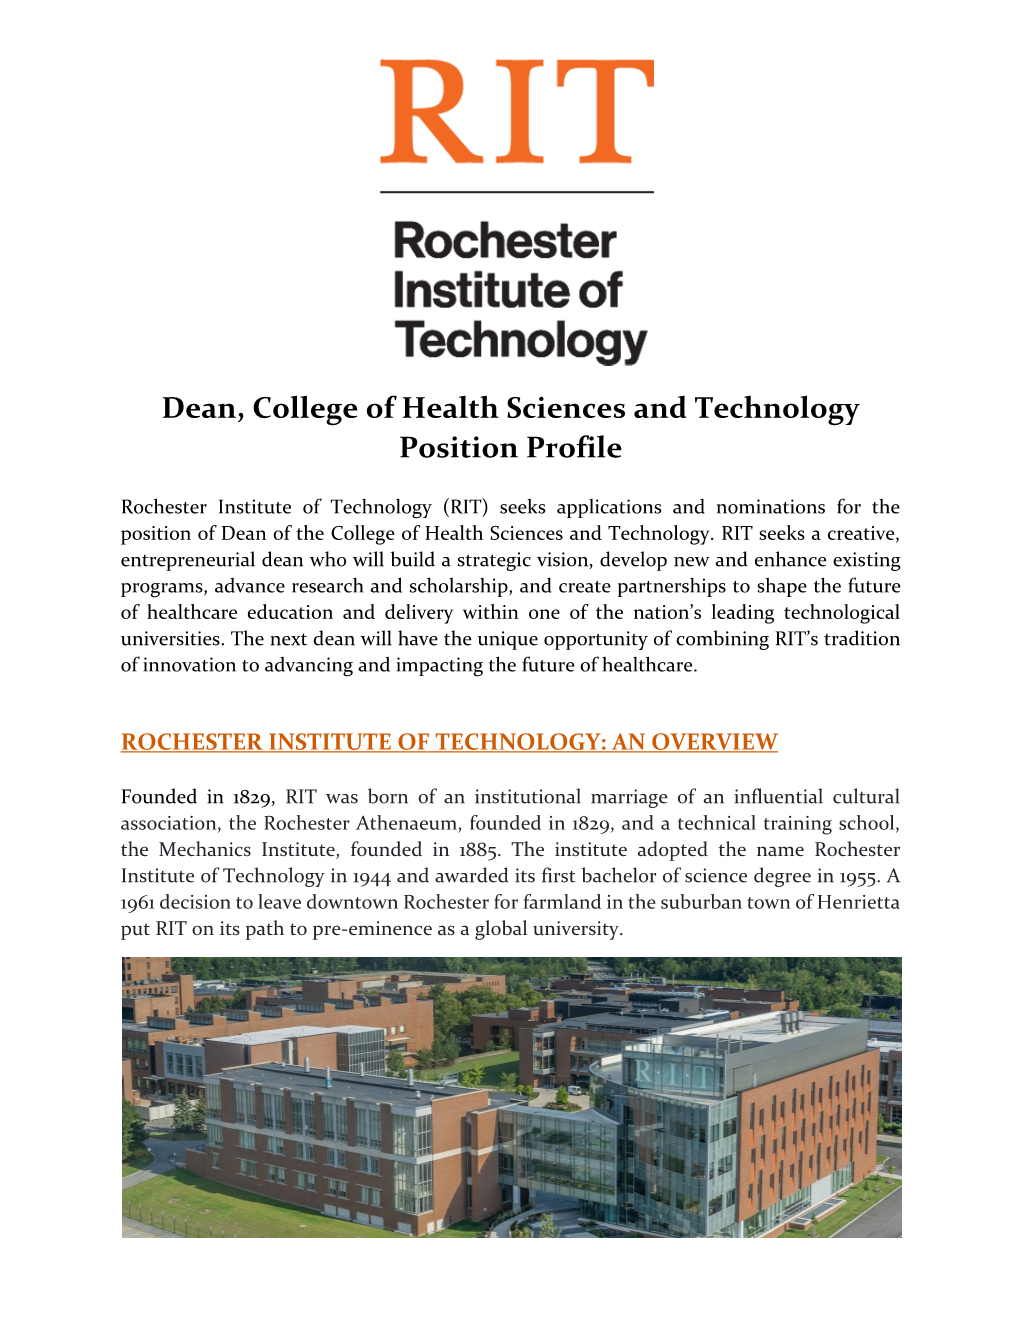 Dean, College of Health Sciences and Technology Position Profile